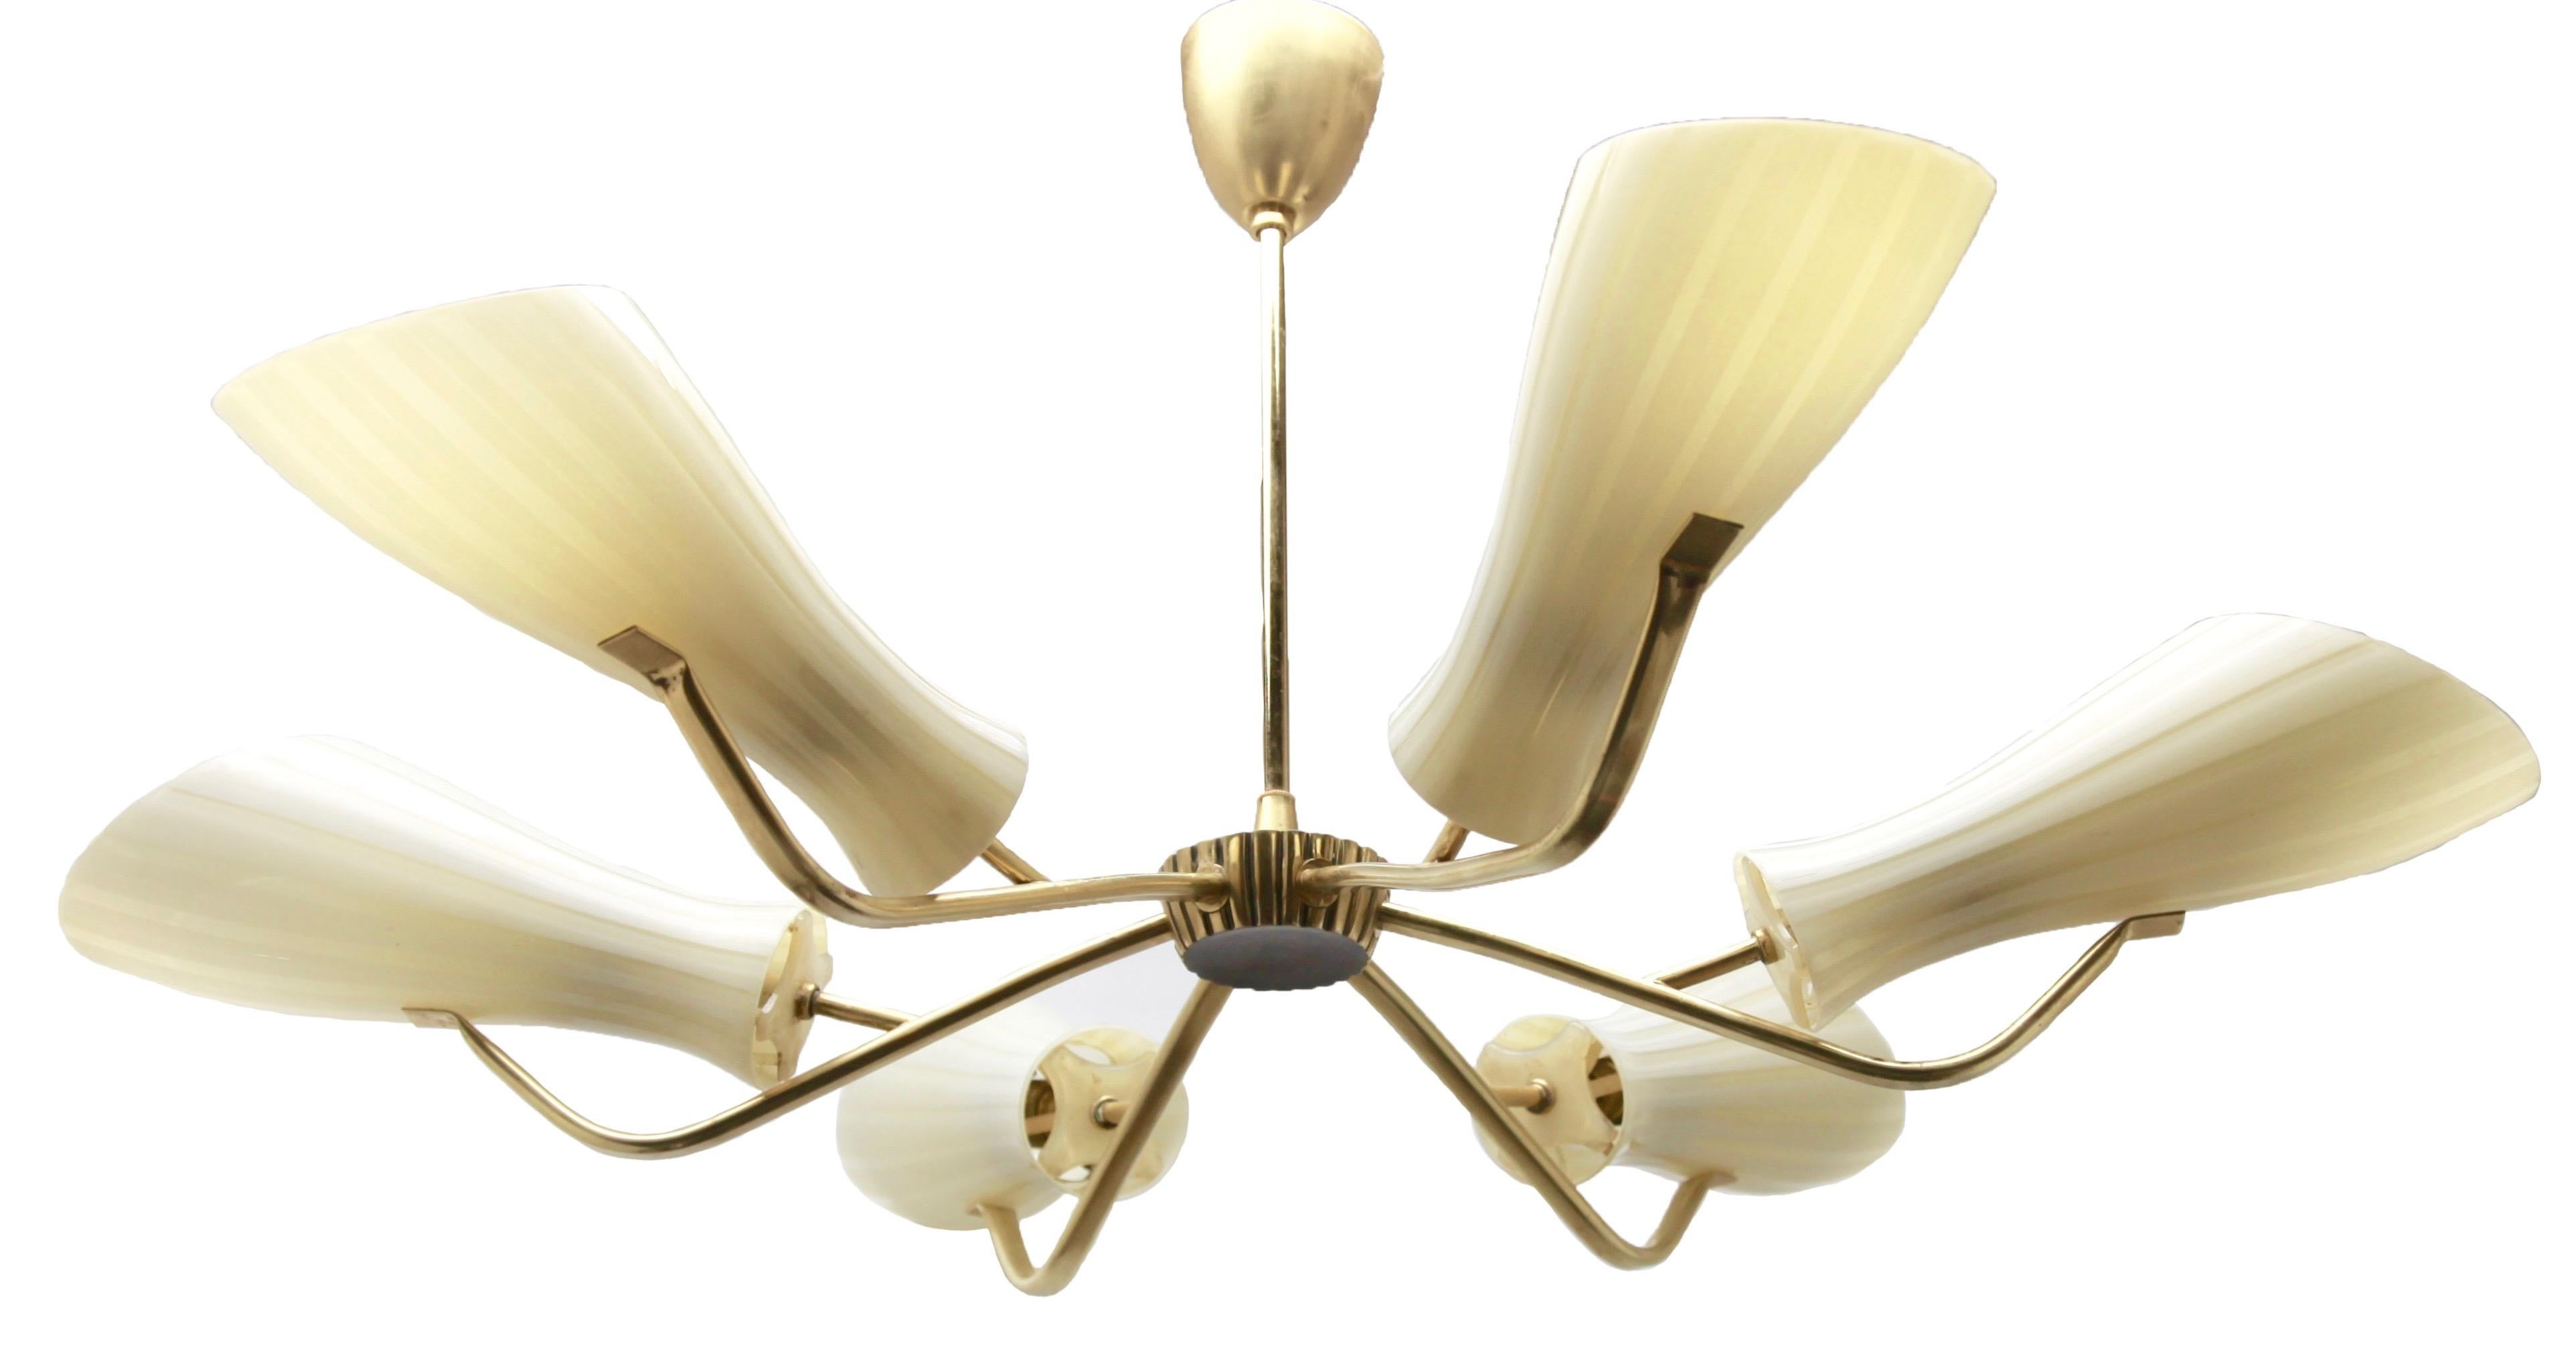 Machine-Made Vintage Chandelier in the Style of Stilnovo Six Arms, Italian, 1960s